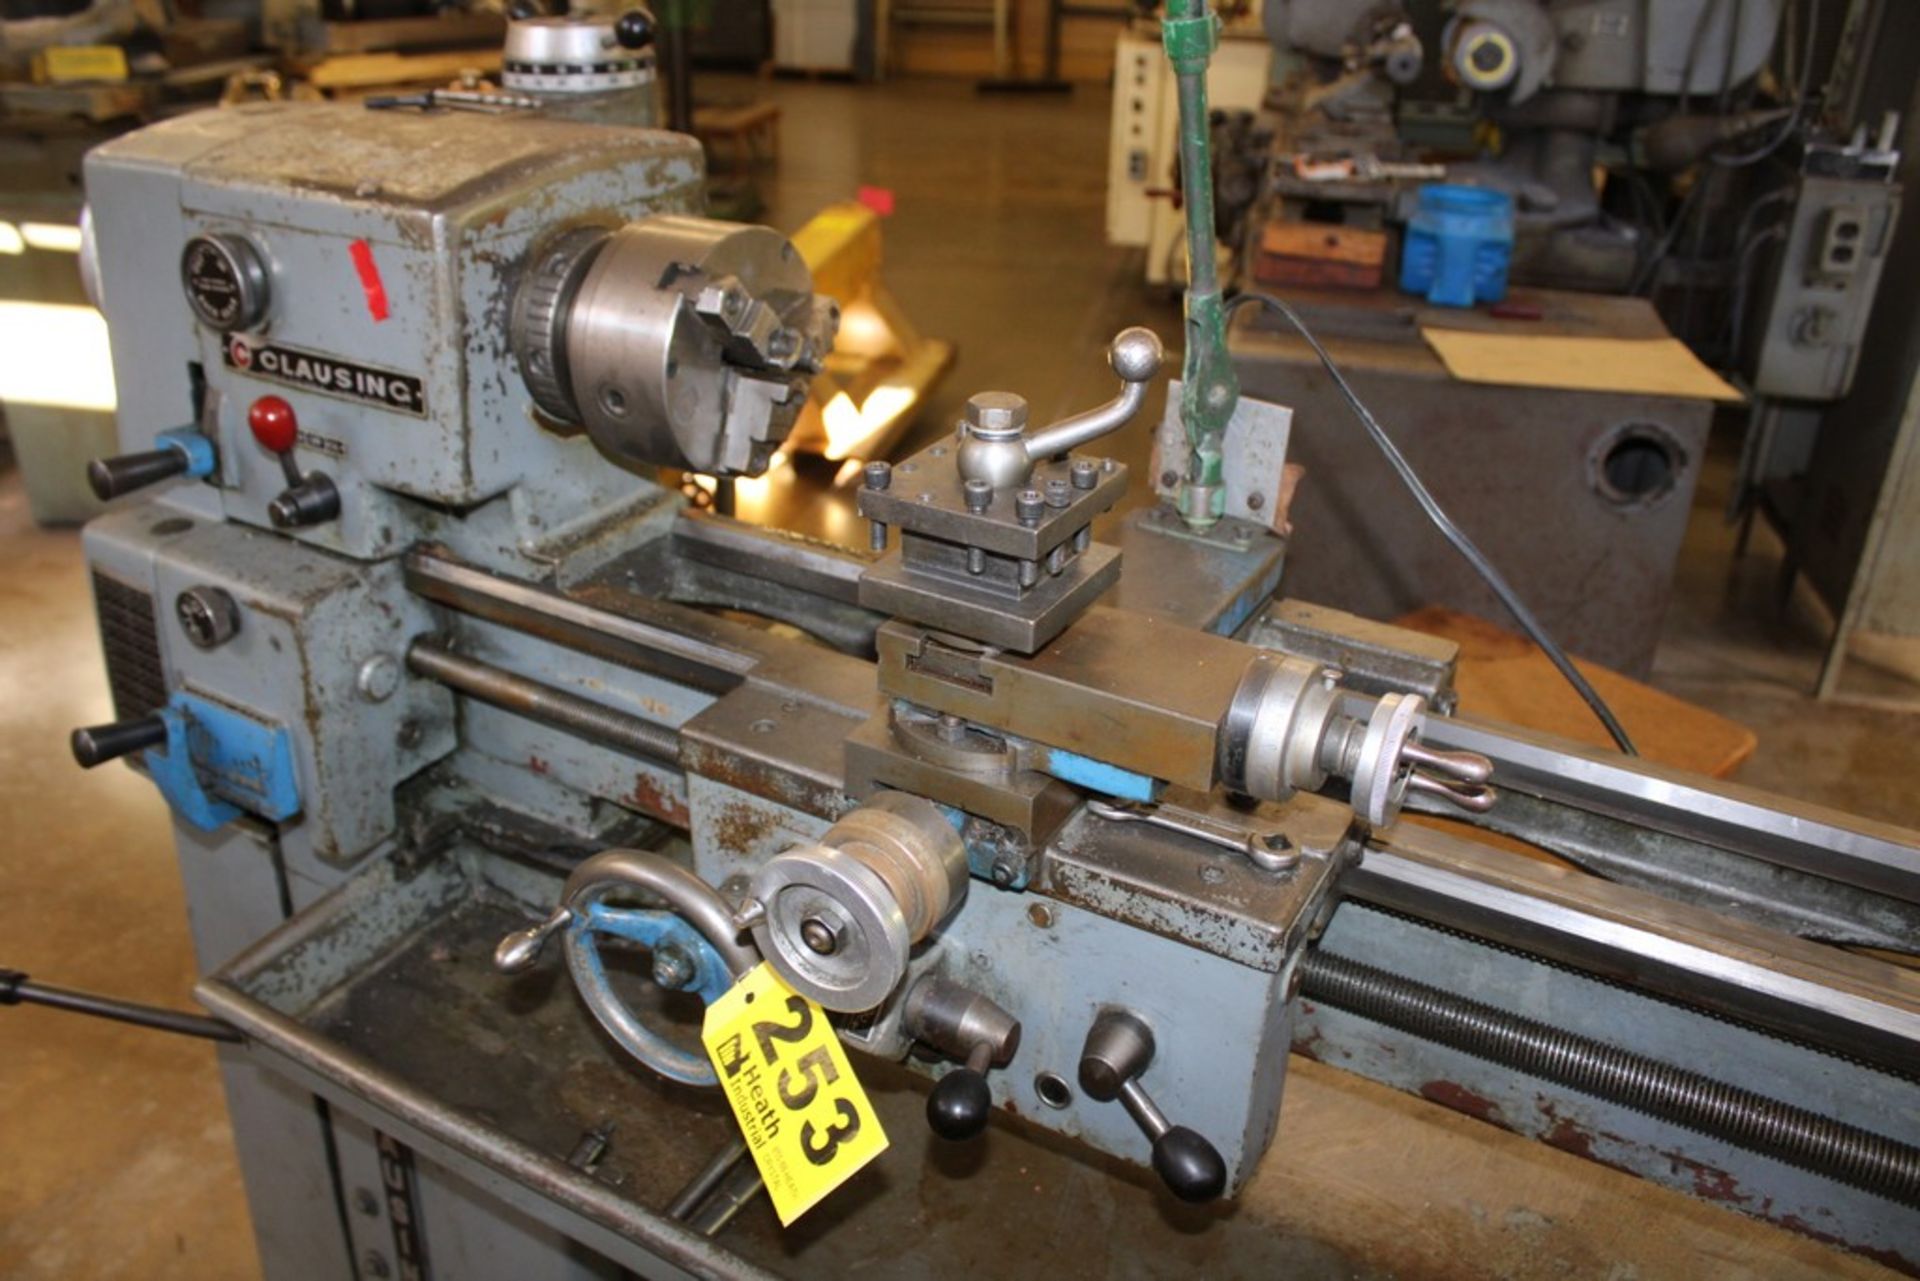 CLAUSING 12"X36" MODEL 5914 TOOLROOM LATHE, S/N 501411, 2,000 RPM SPINDLE, WITH 3-JAW CHUCK, INCH - Image 3 of 6